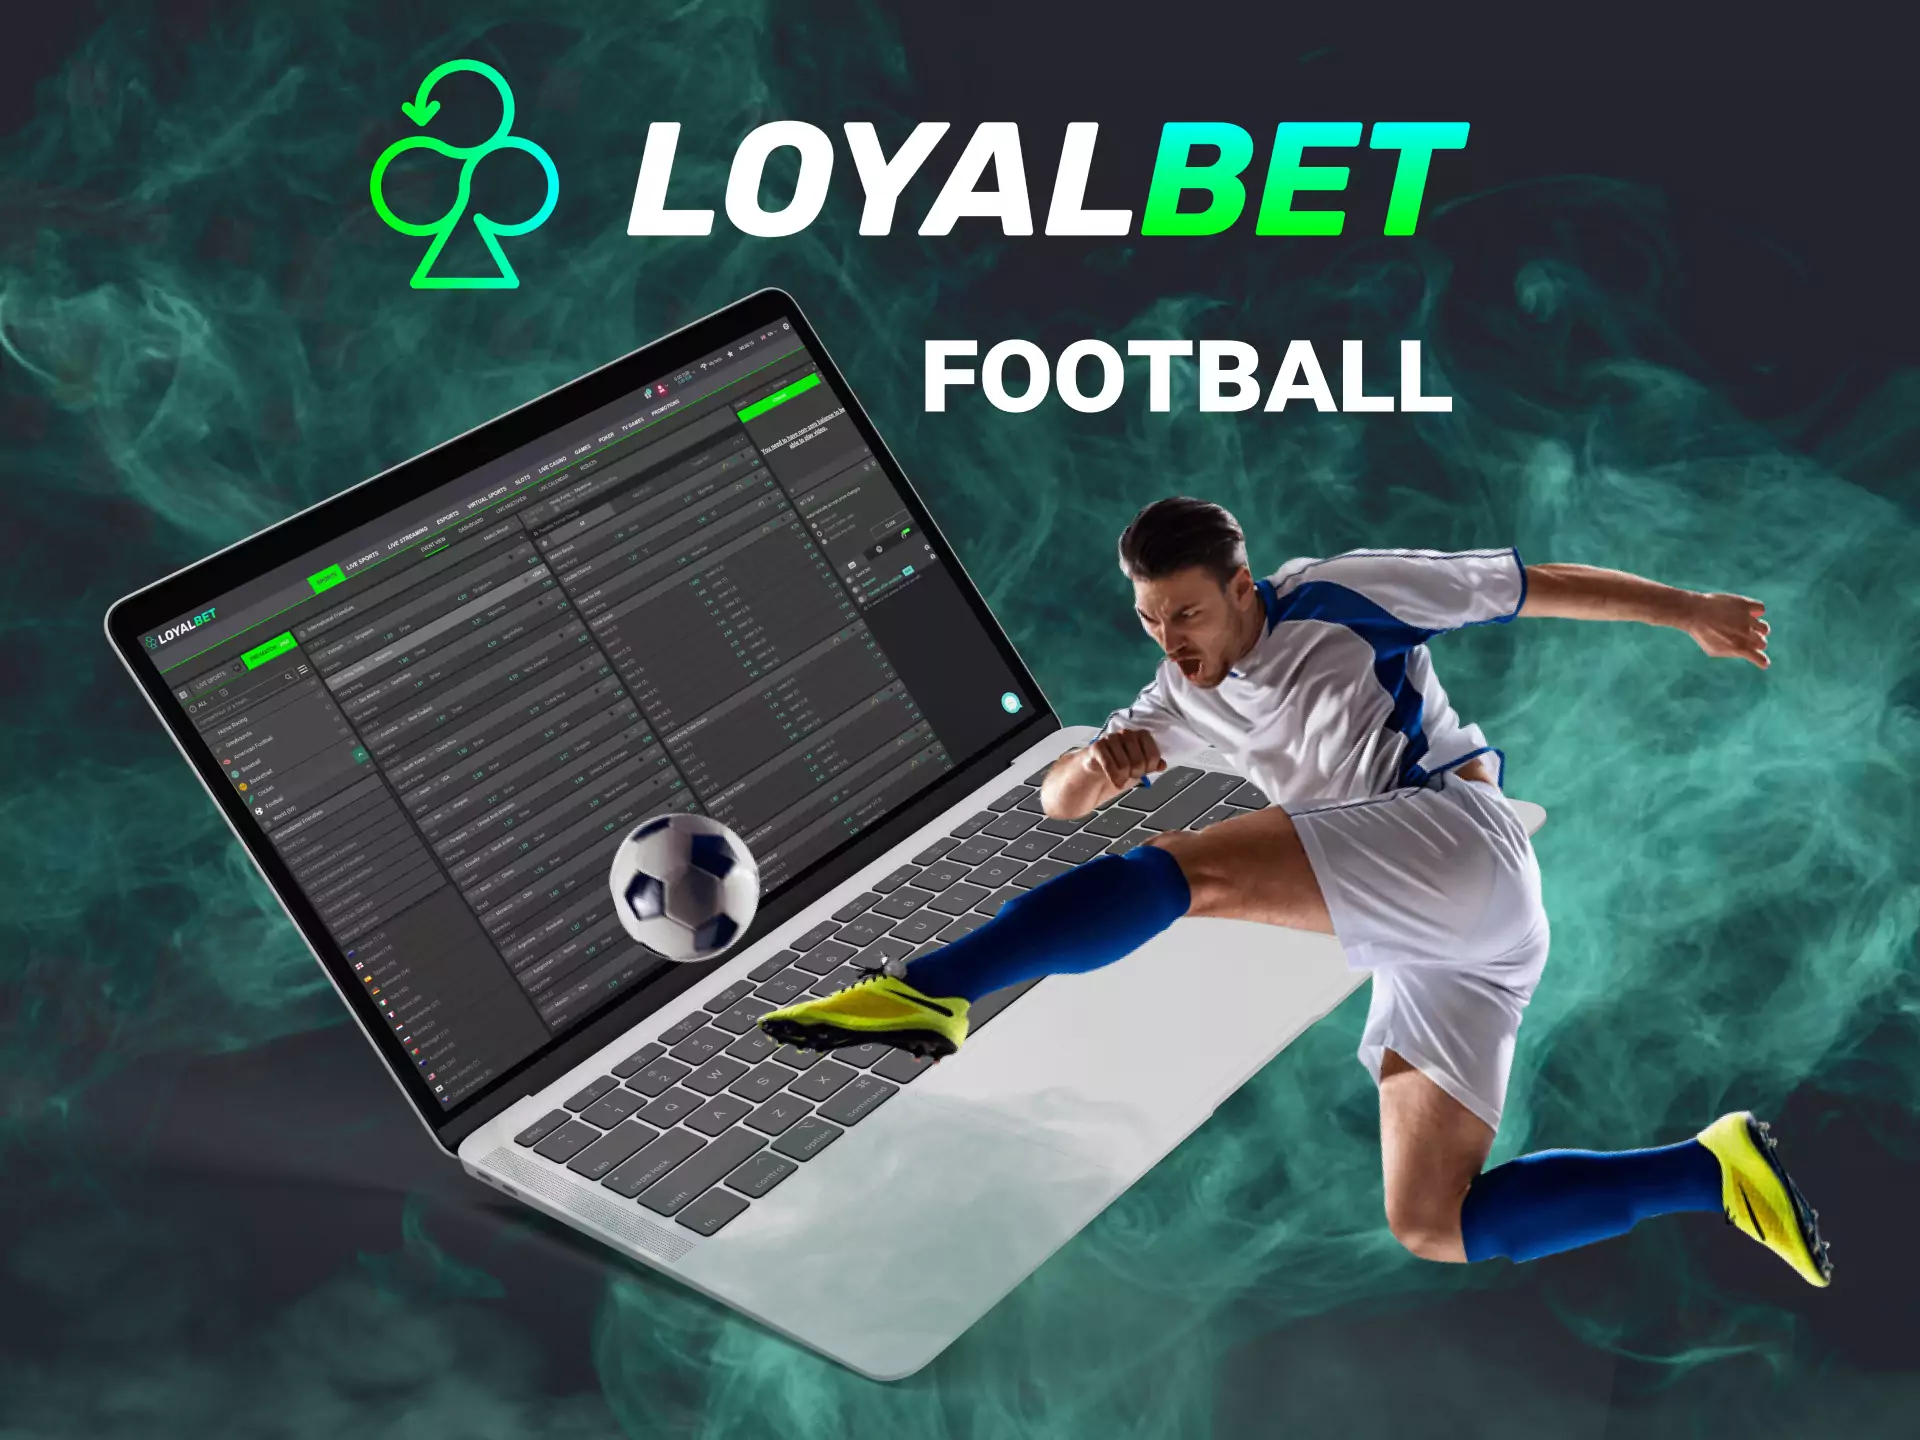 On the Loyalbet website, you can bet on football.